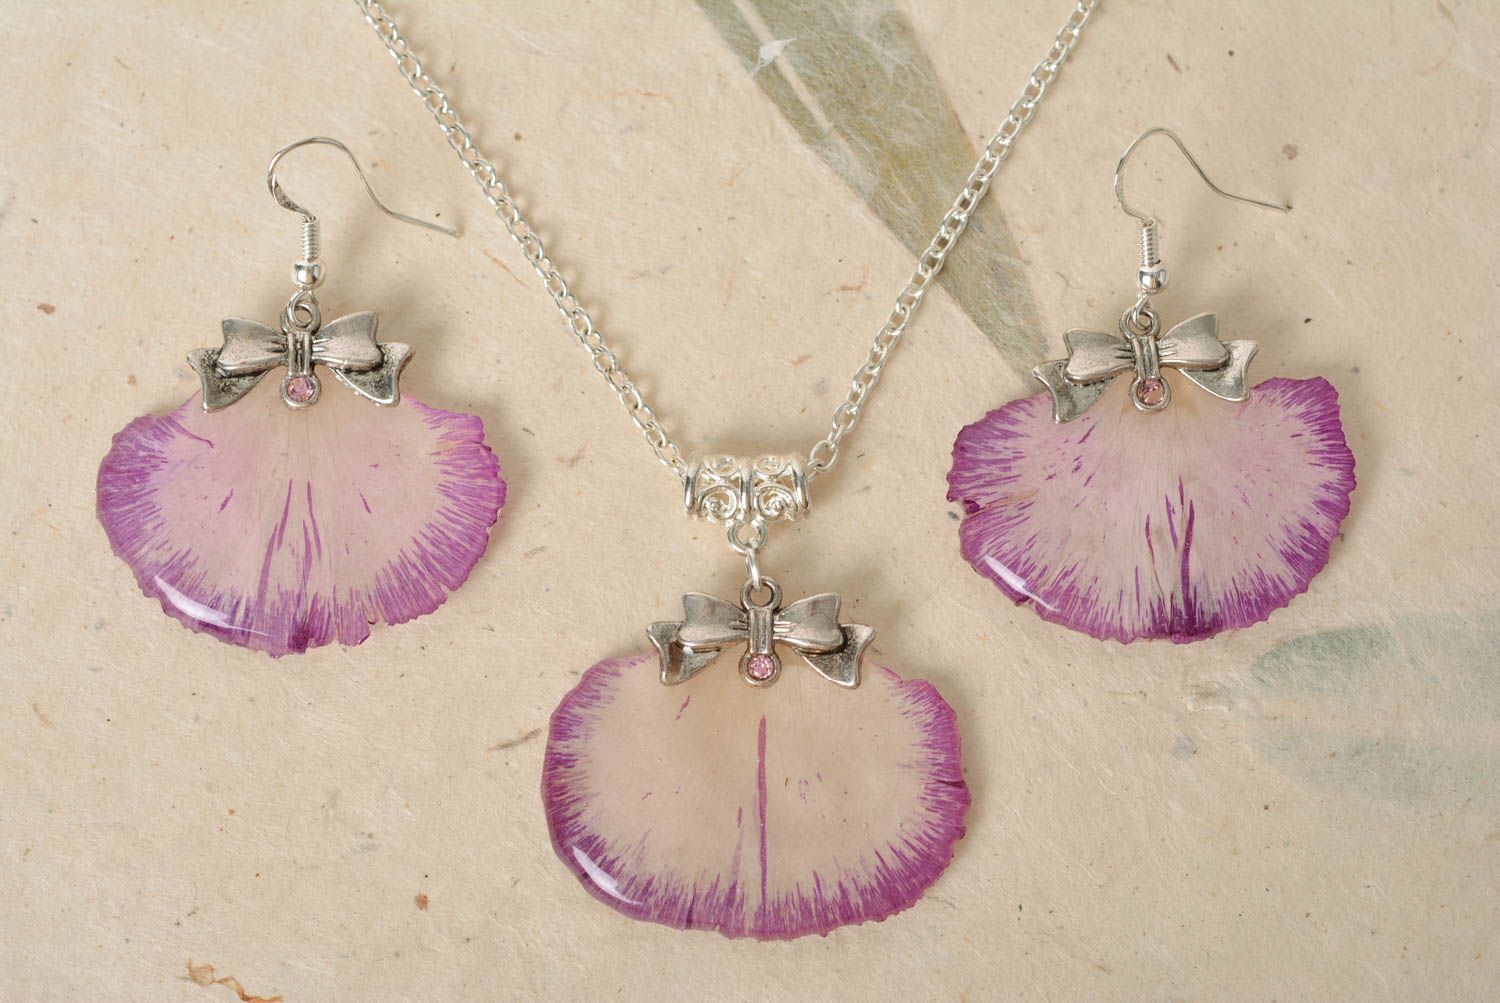 Set of jewelry made of epoxy resin with dried flowers earrings and pendant photo 1